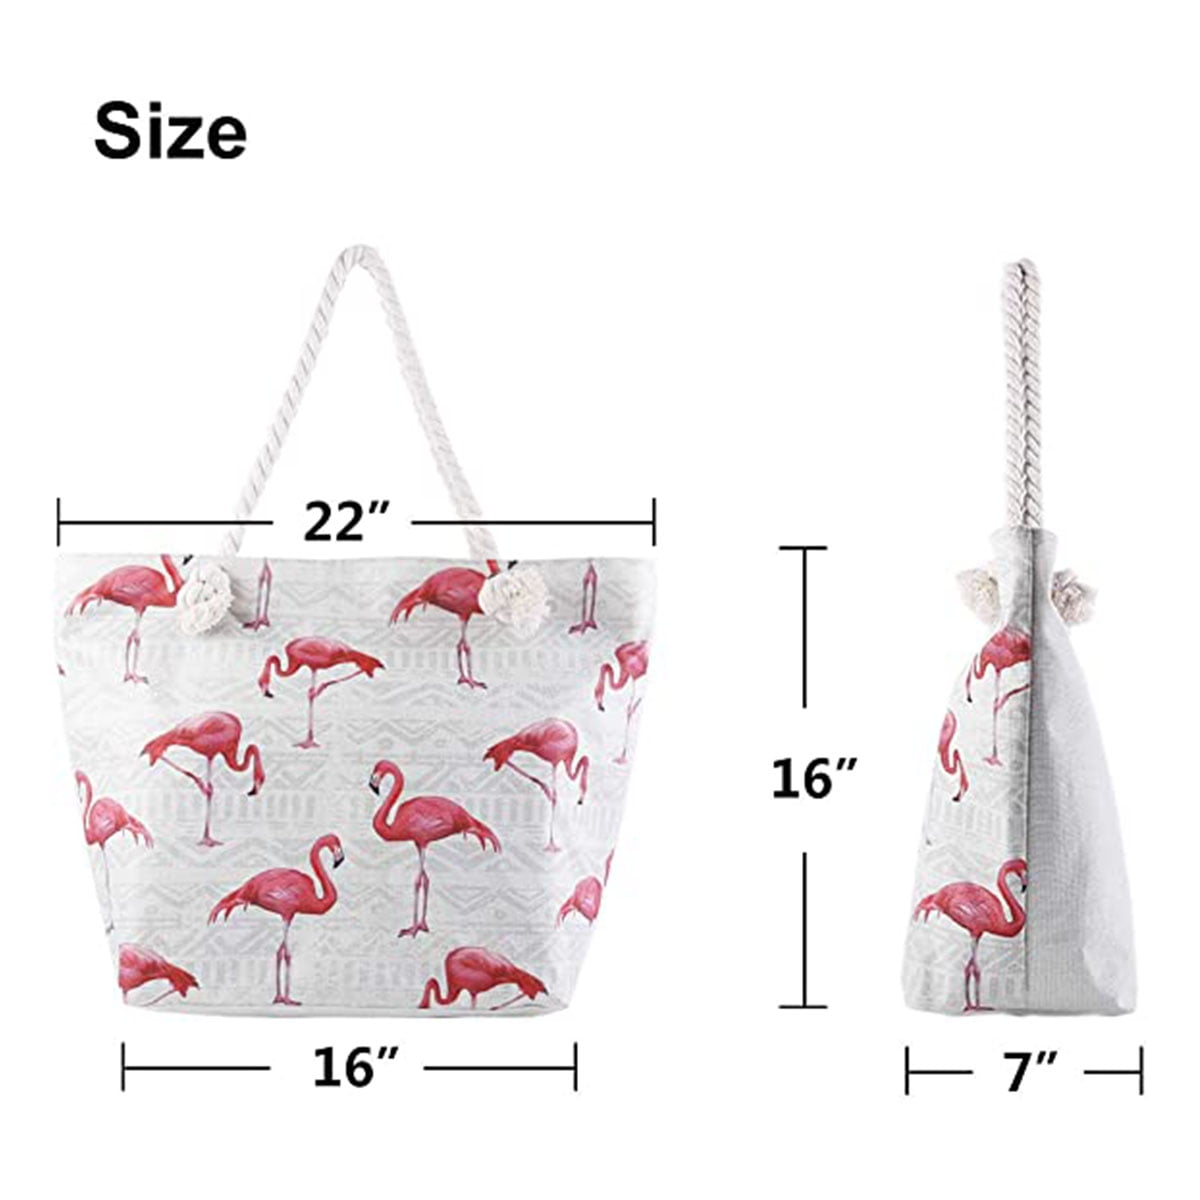 Women Large Beach Canvas Tote Bag With Zipper Pockets For Swim Pool Gym  Hiking Picnic Travel